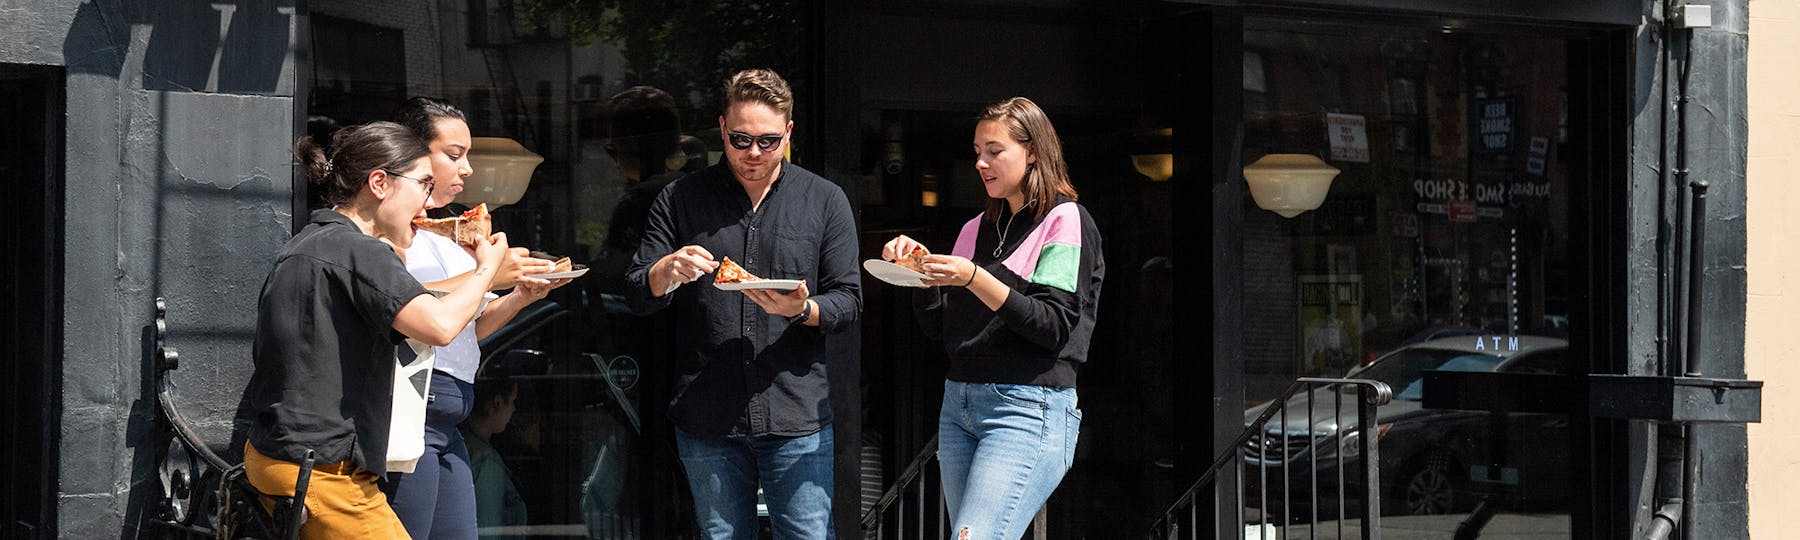 group of people eating outside of a pizza restaurant